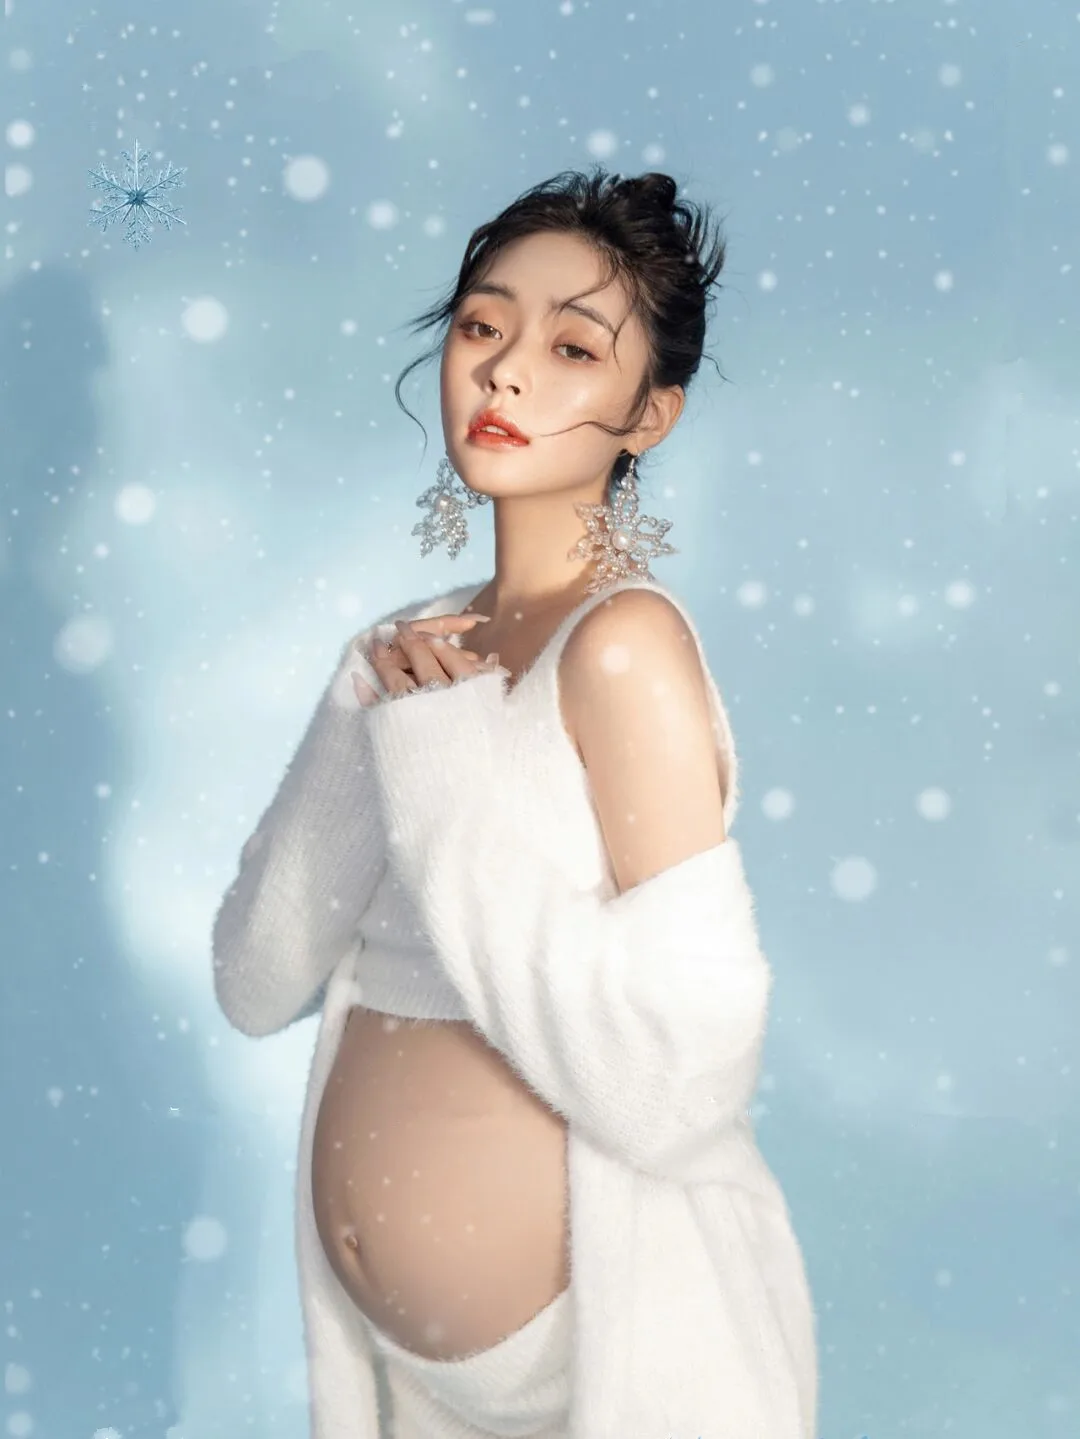 Dvotinst Women Photography Props Maternity White Knitted Tank Skirt Cardigans 3pcs Pregnancy Set Studio Photoshoots Clothes enlarge